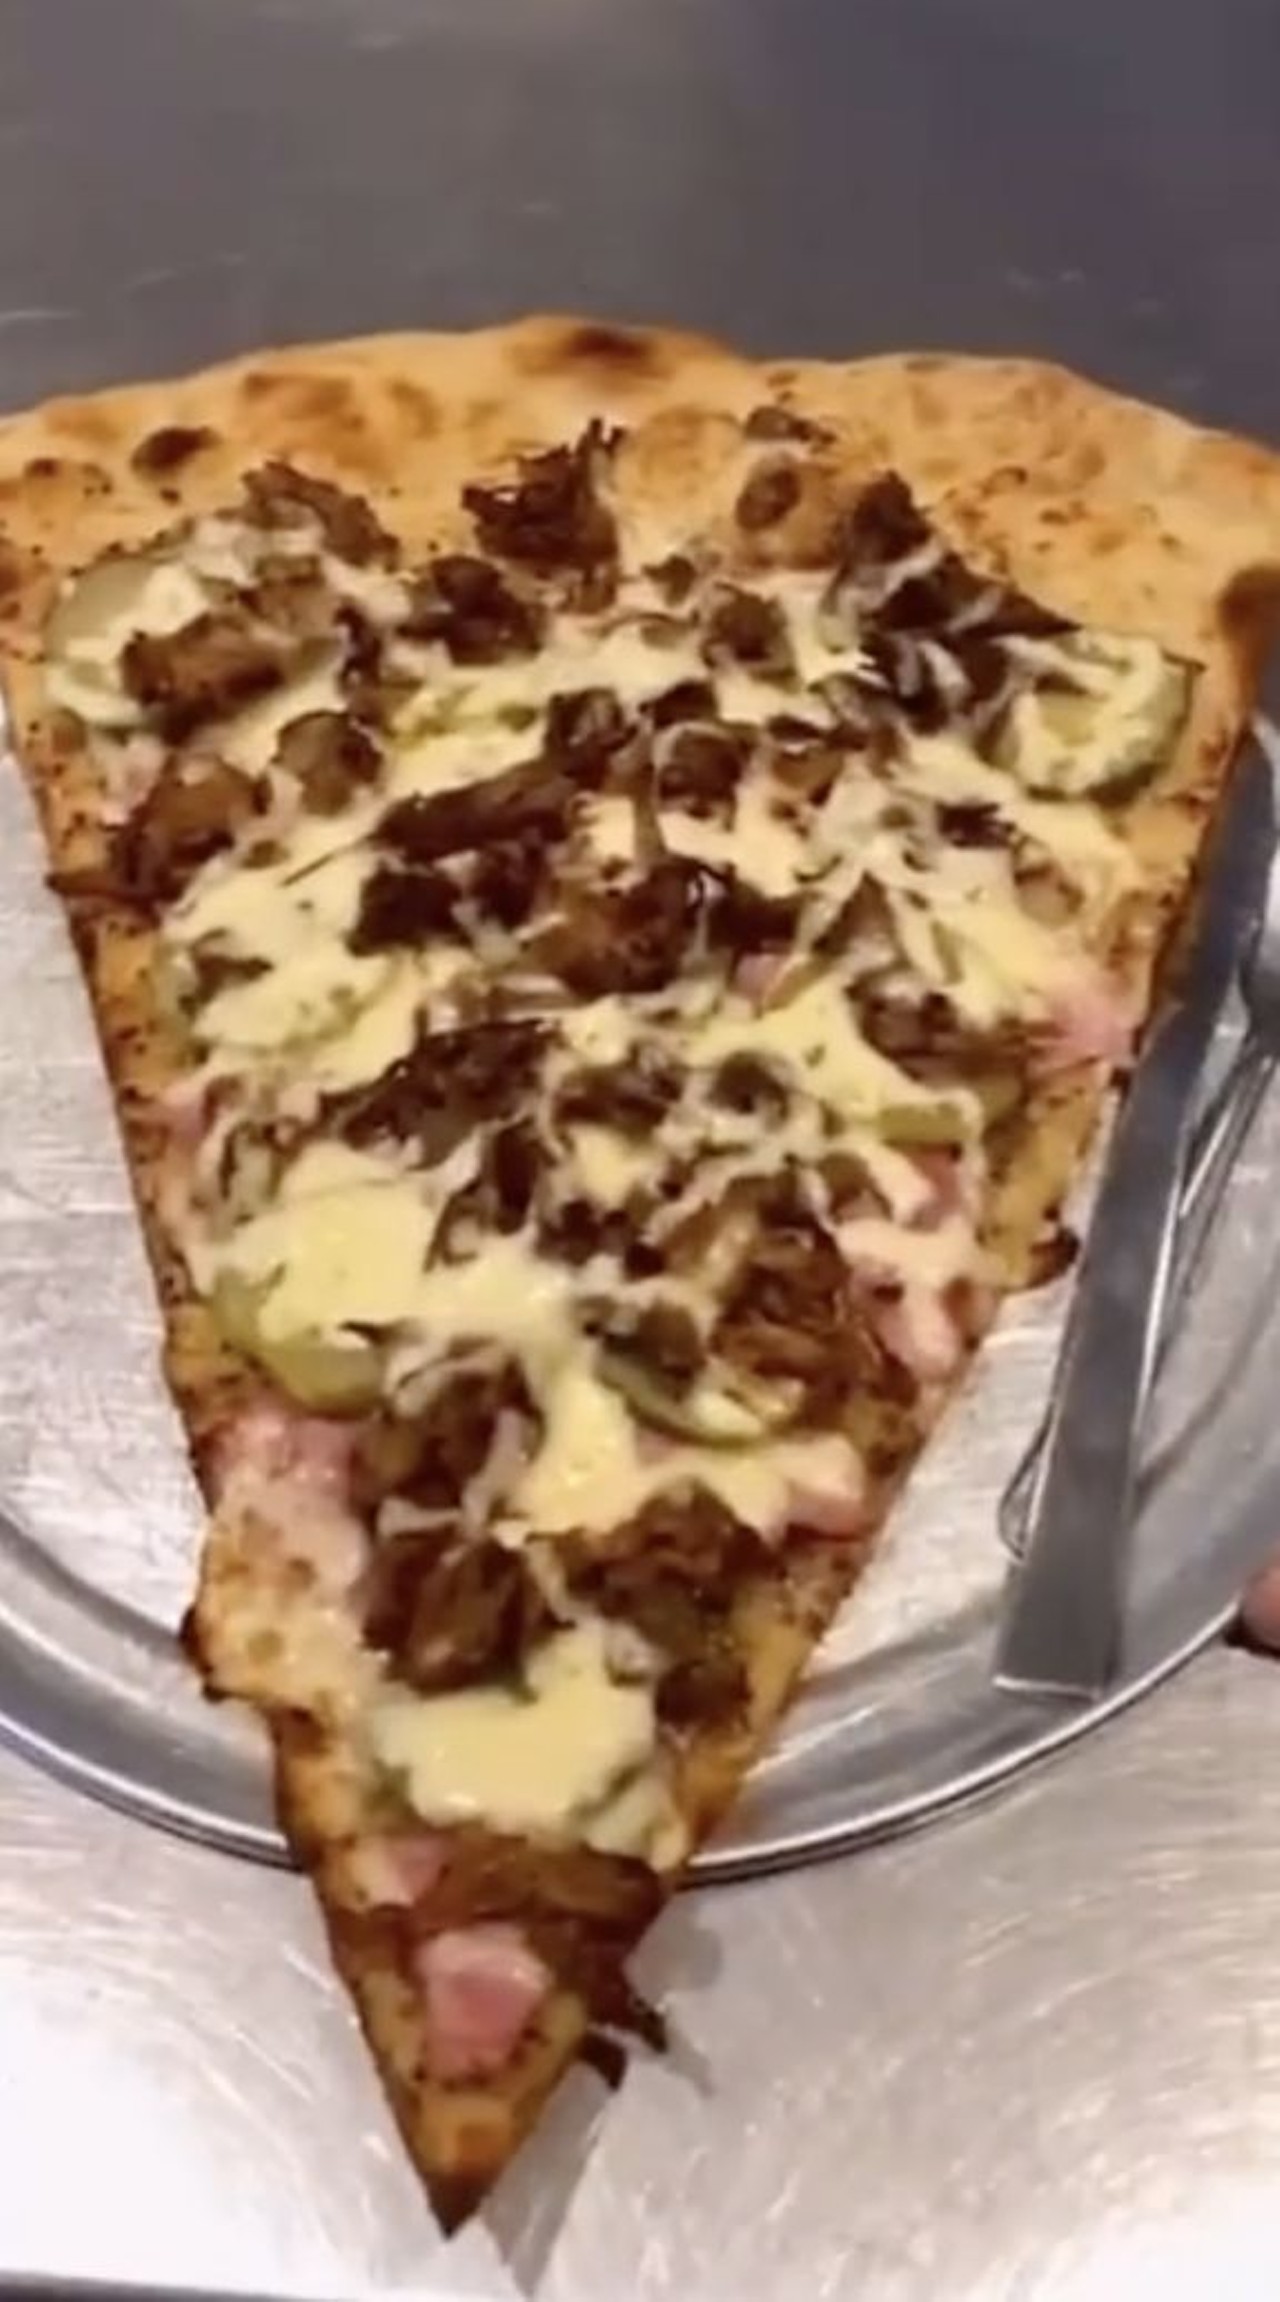  The Cuban Slice 
Lazy Moon, 11551 University Blvd. and 1011 E. Colonial Drive
The Cuban Slice from Lazy Moon is quite the explosion of flavors, featuring a mustard base, mojo pork, ham, and dill pickles.
Photo via Instagram